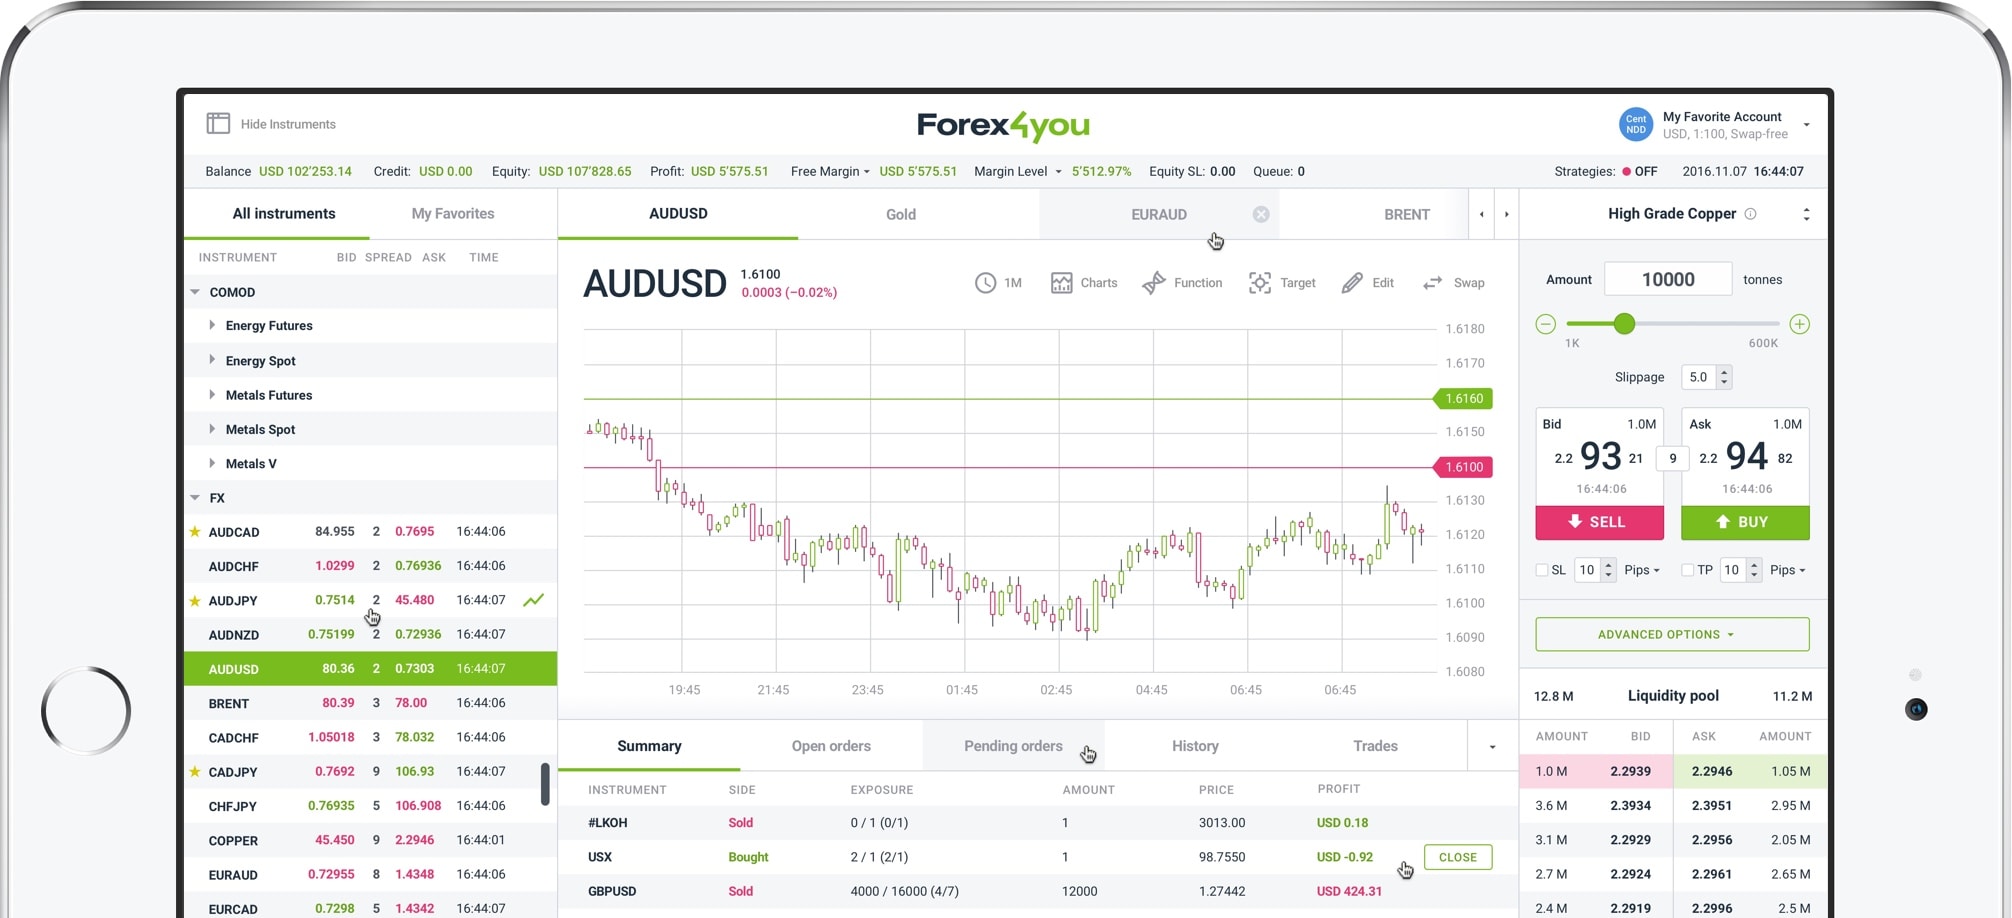 Edge web trader forex forex trading is easy